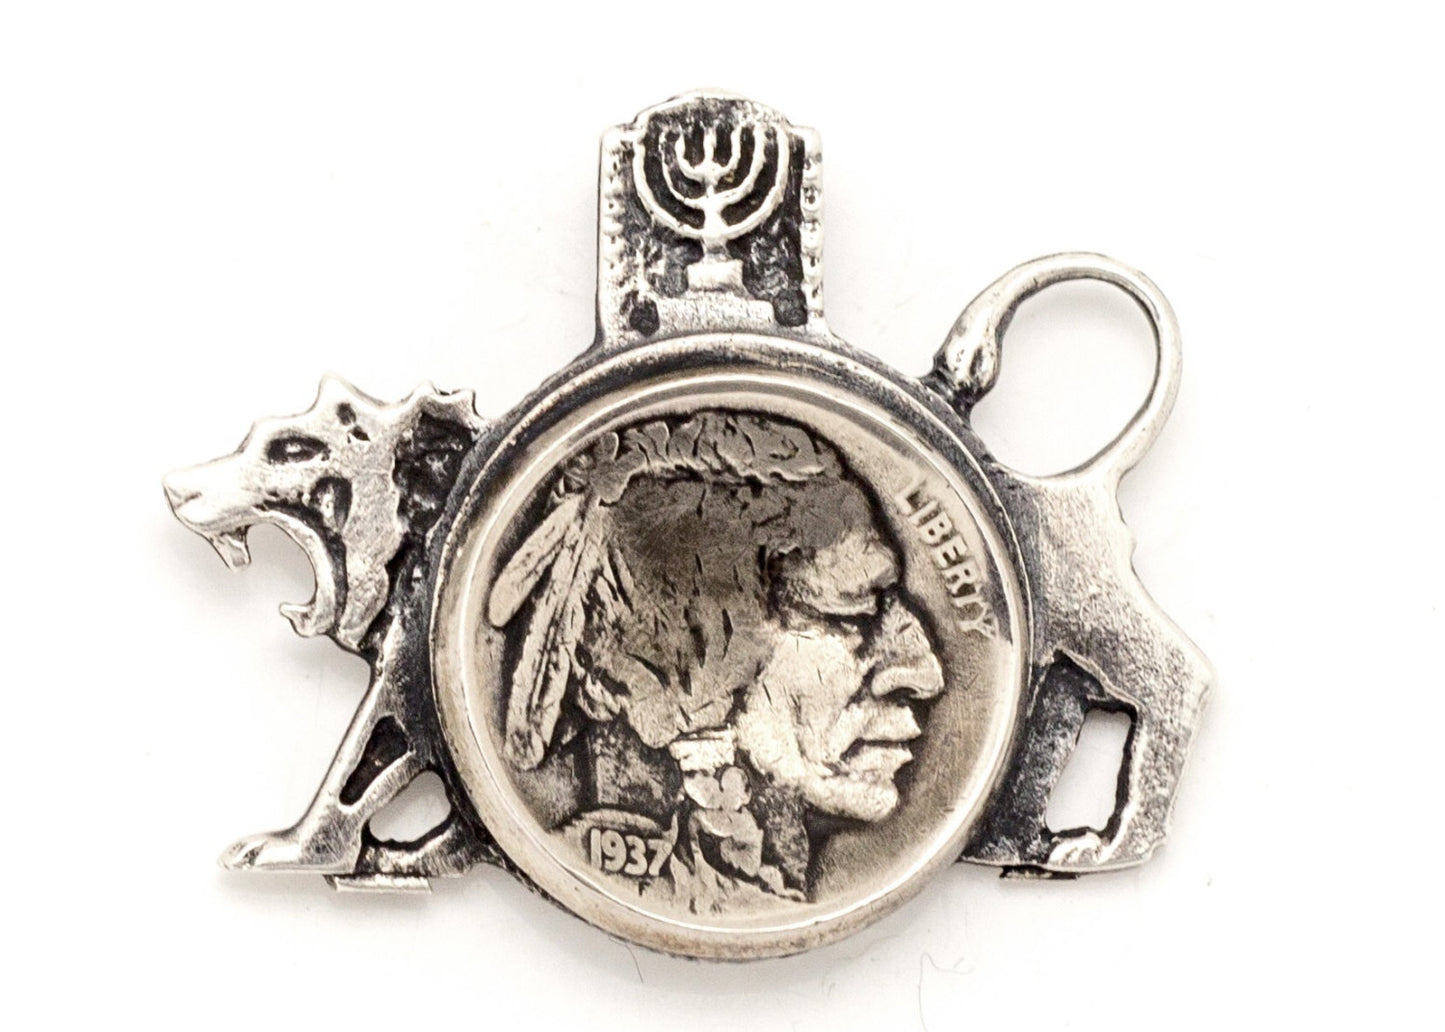 Coin pendent with the Buffalo Nickel coin of The USA